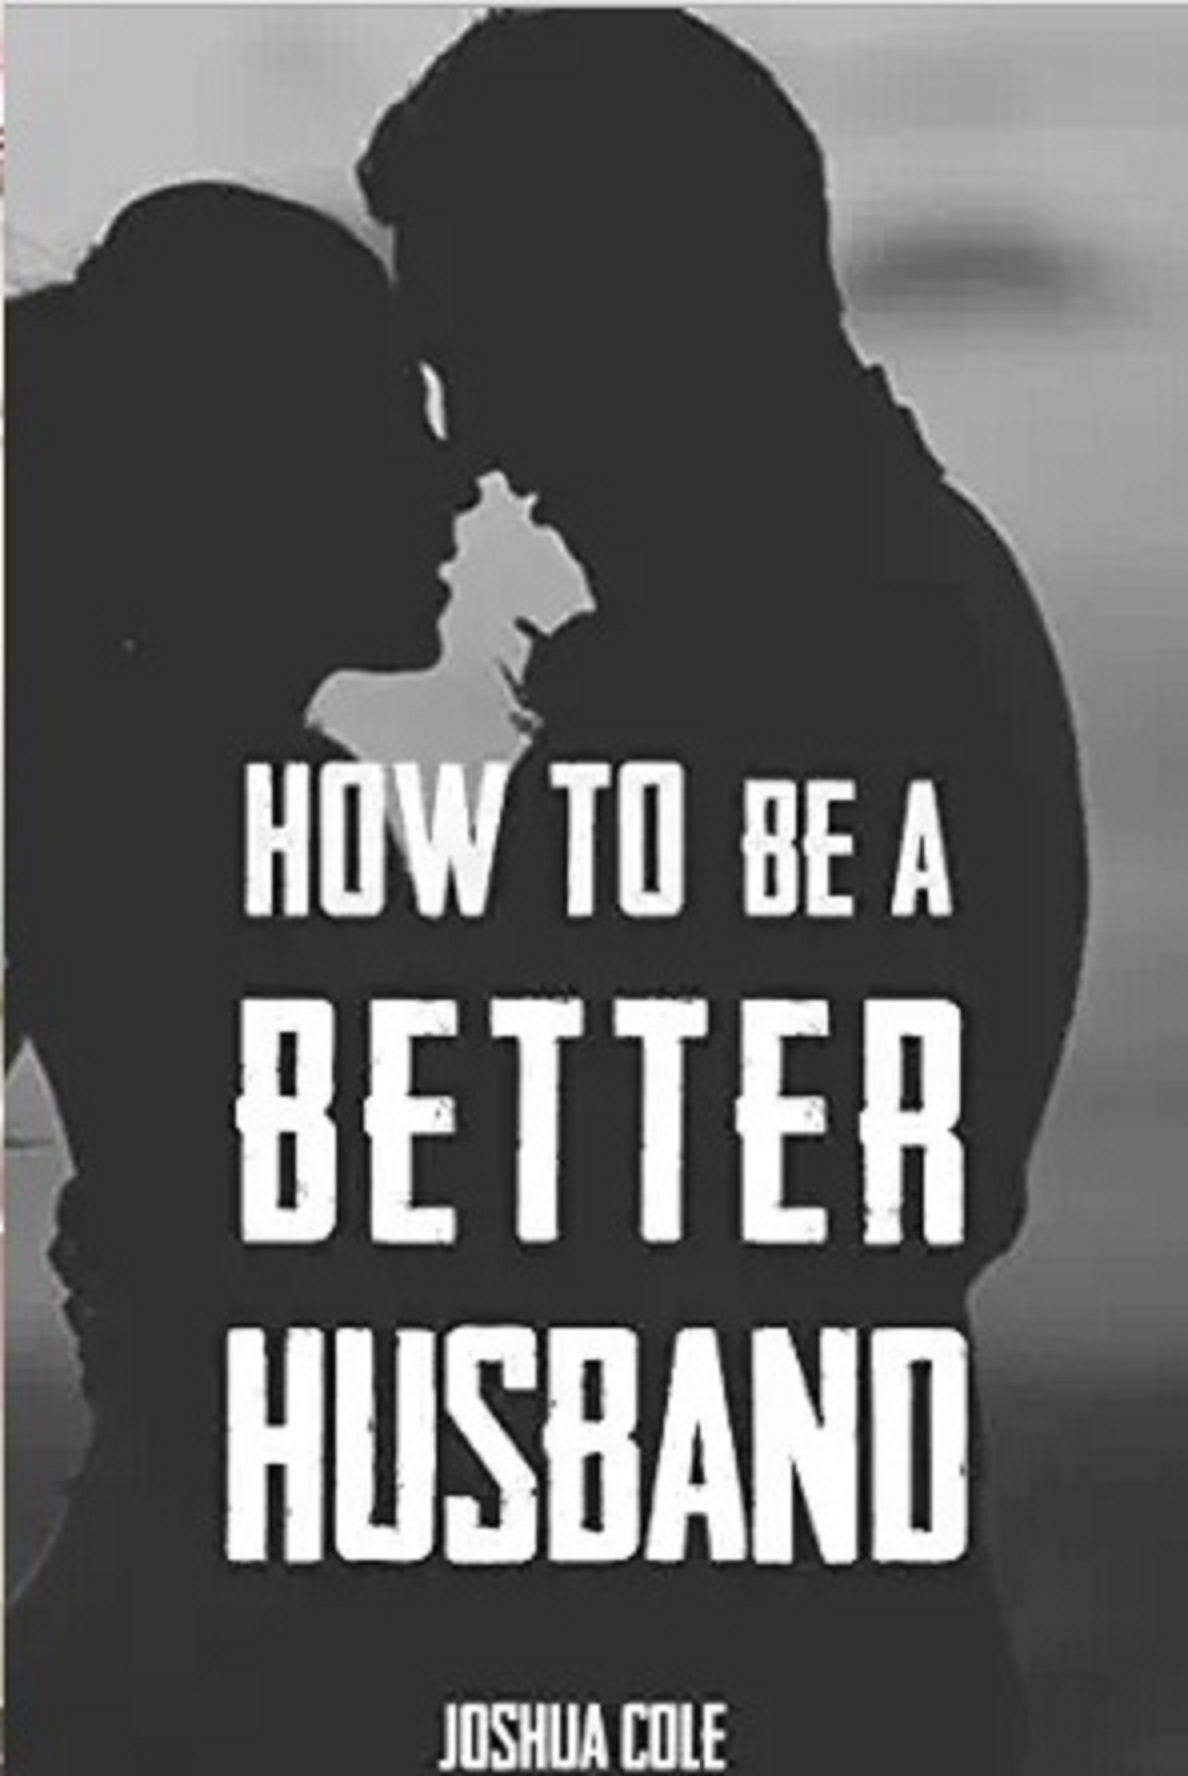 FREE: How To Be A Better Husband by Joshua Cole